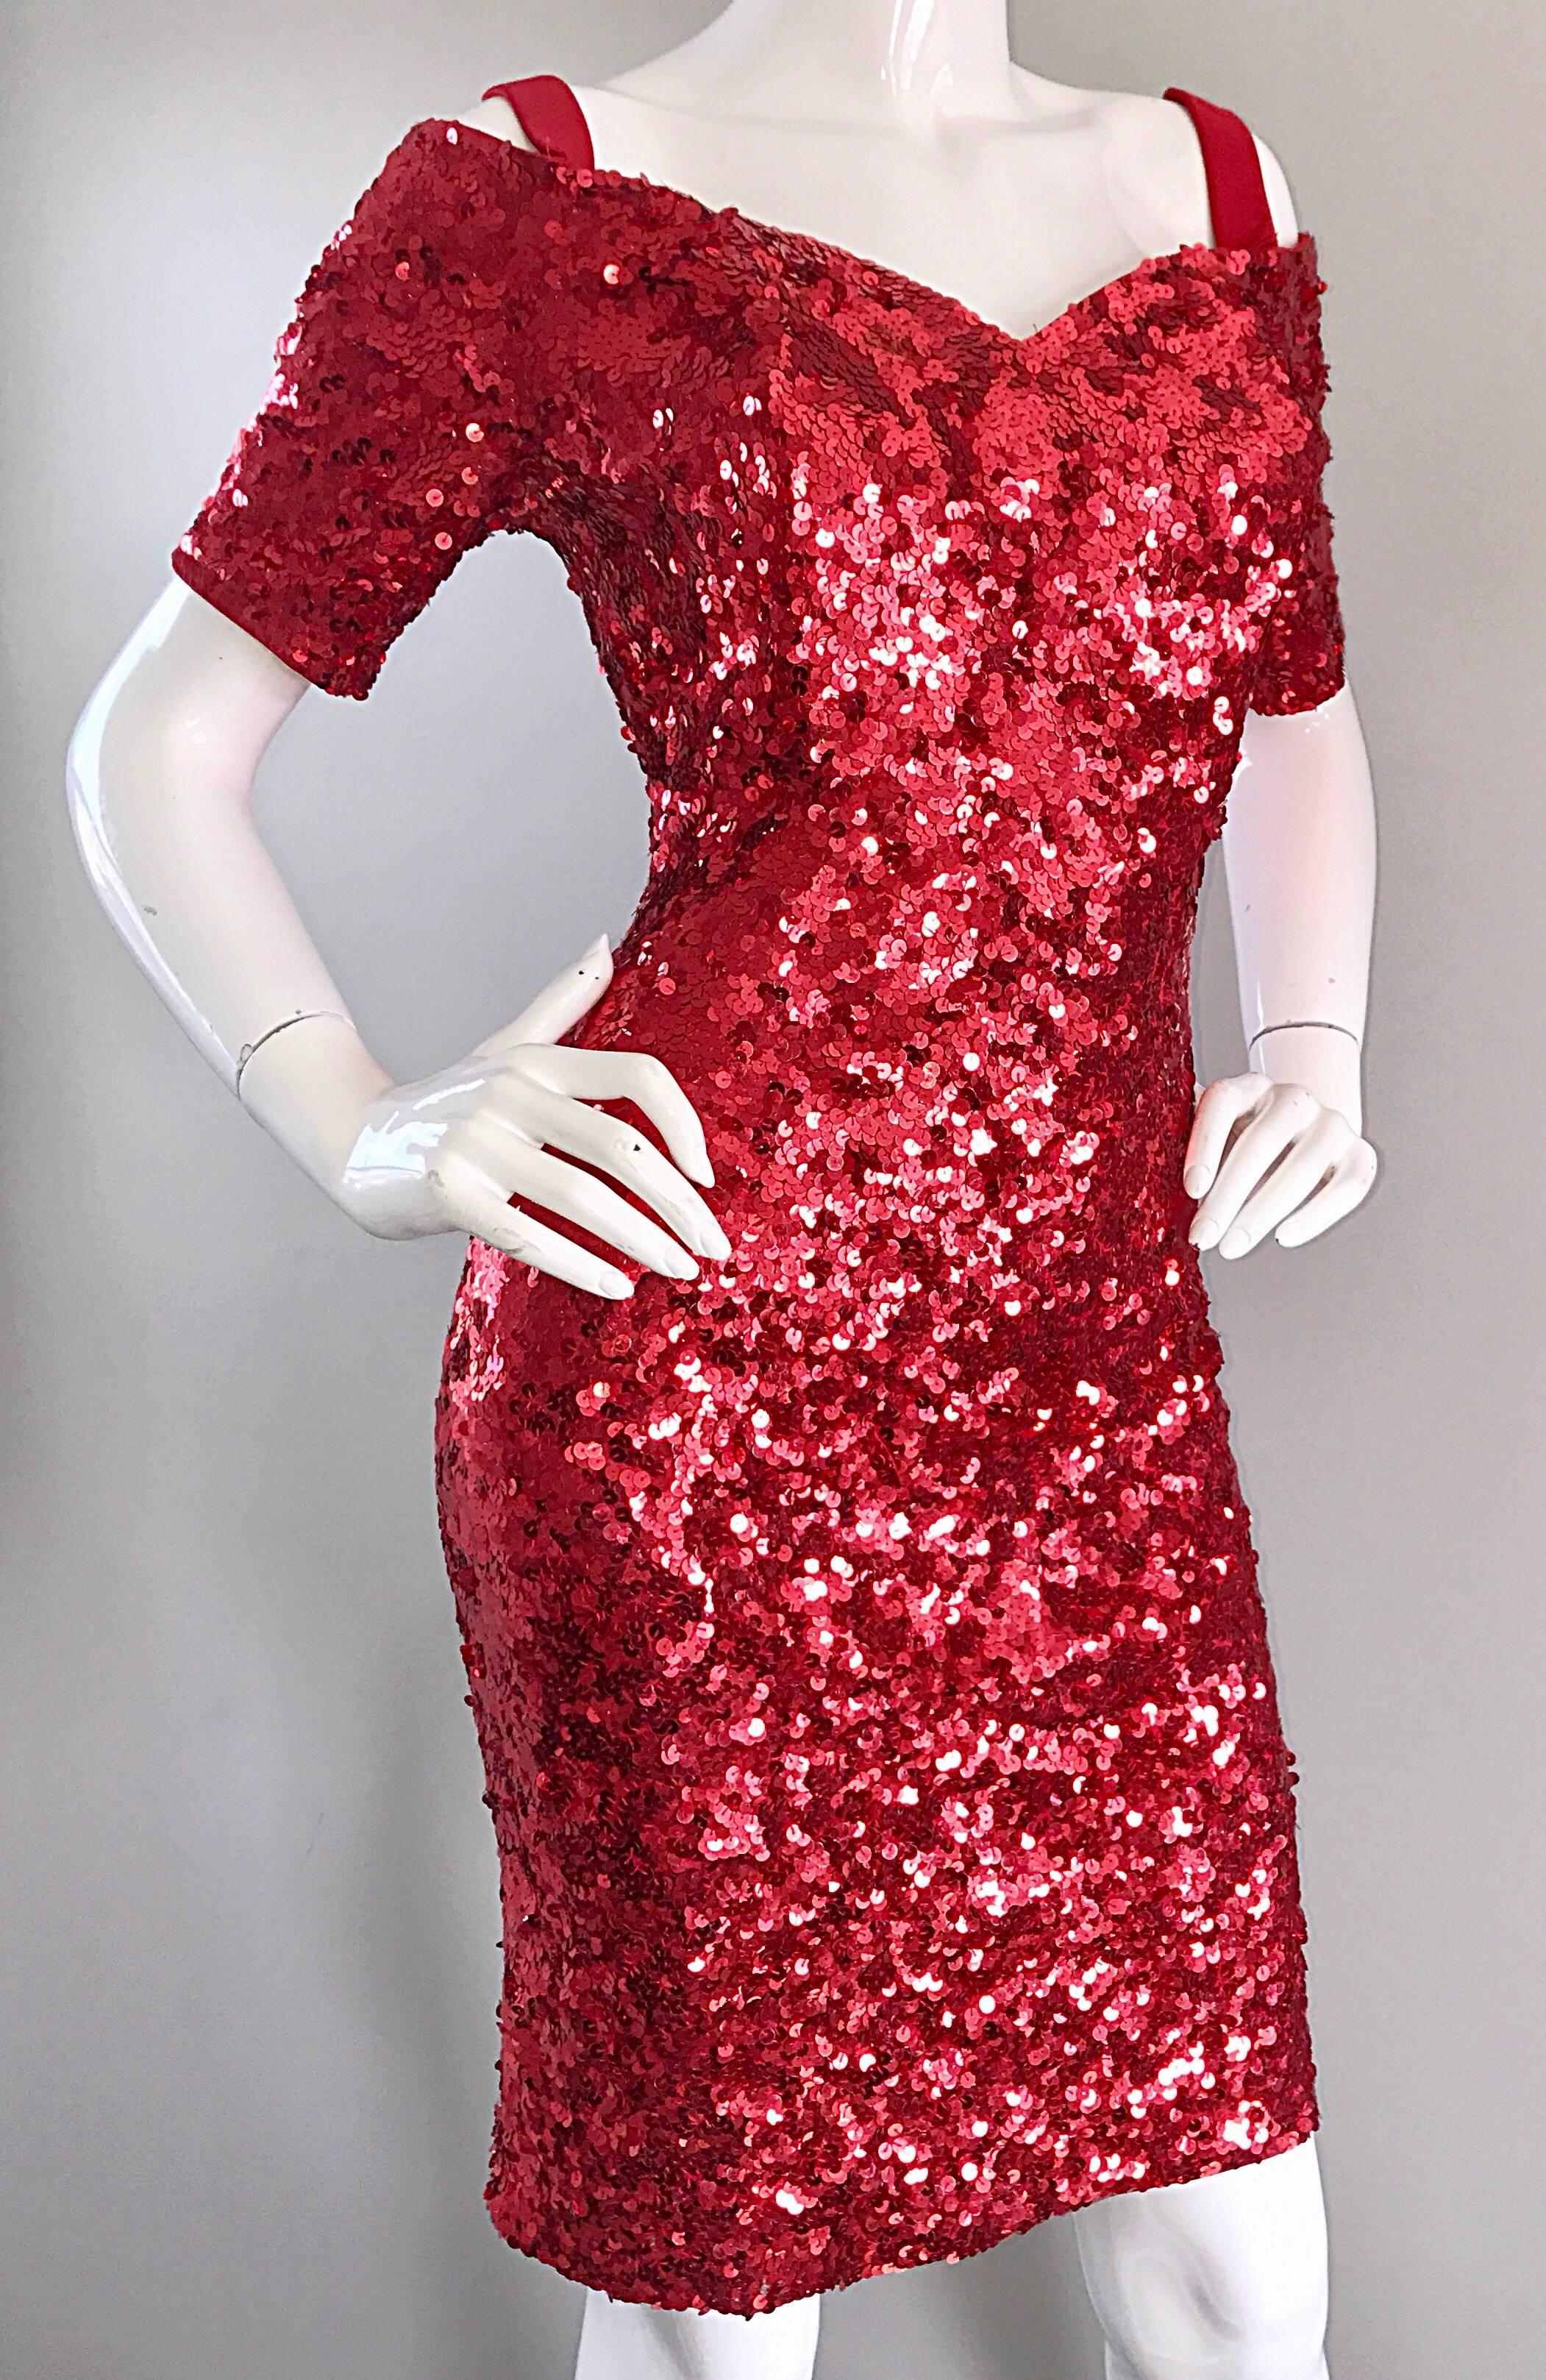 Women's Lillie Rubin 1990s Sexy Vintage Red Sequin Off The Shoulder 90s Bodycon Dress For Sale